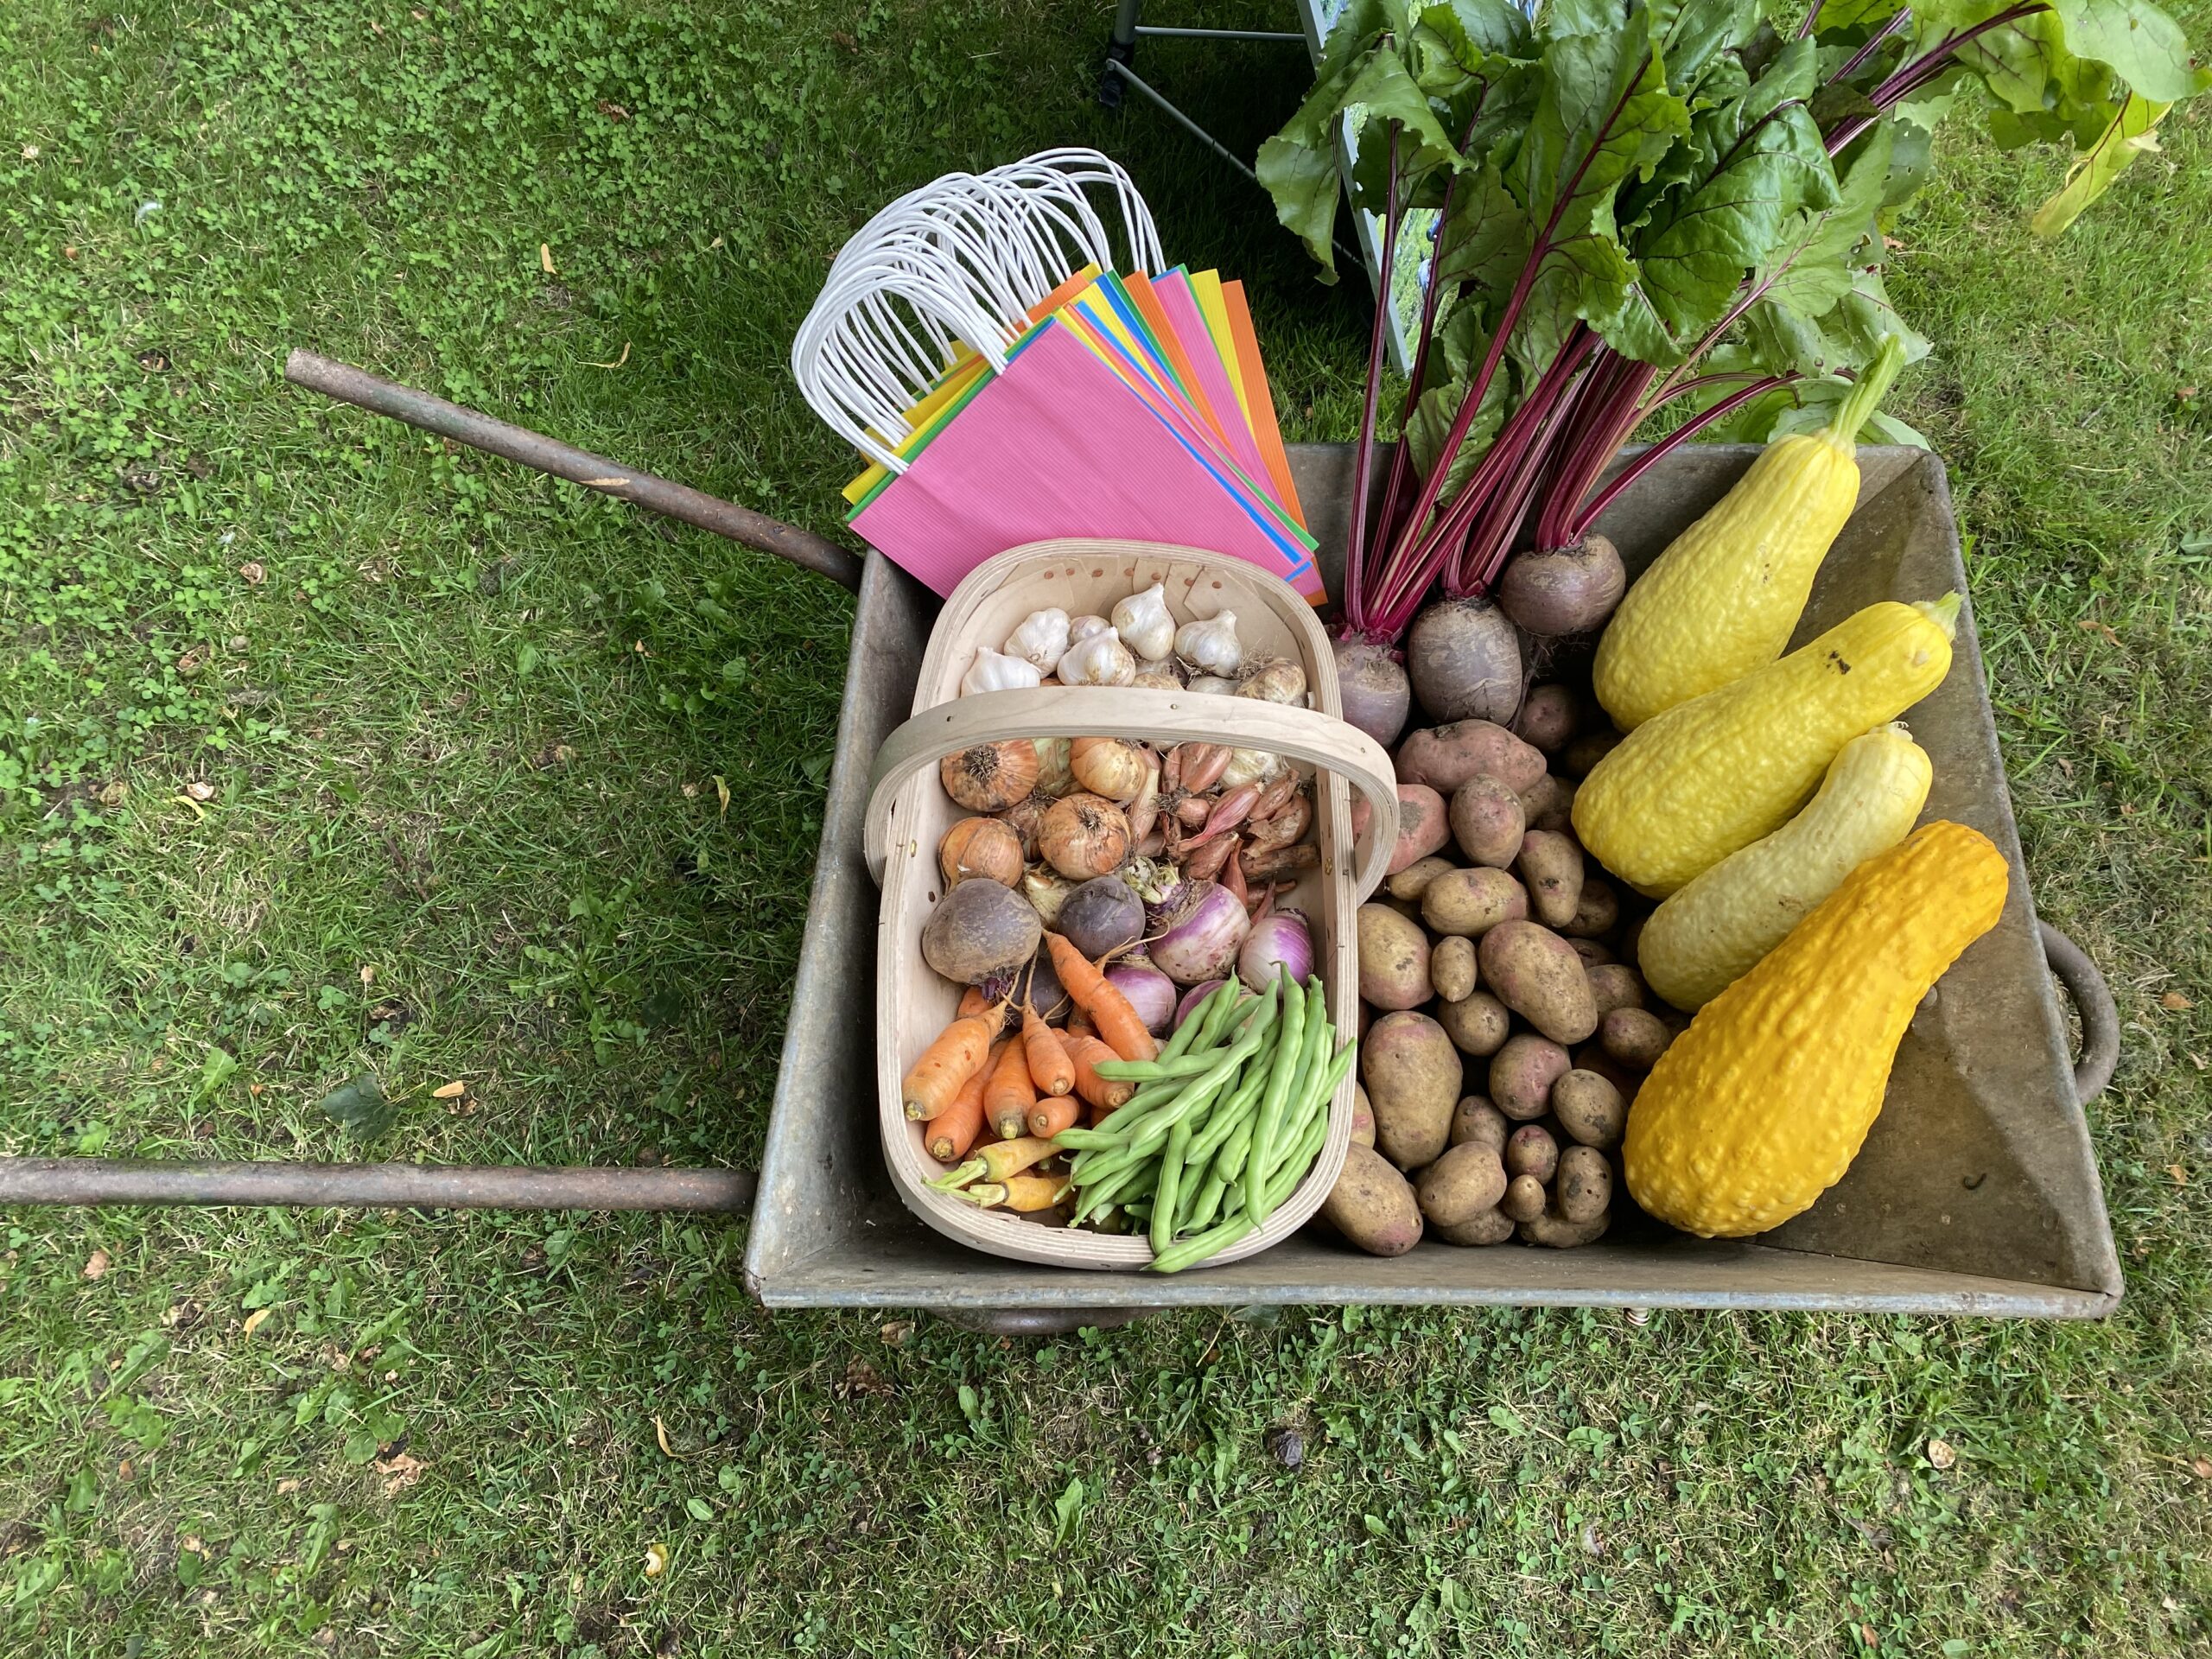 Produce from the 1918 Allotment we shared with the audience at reading events in 2021